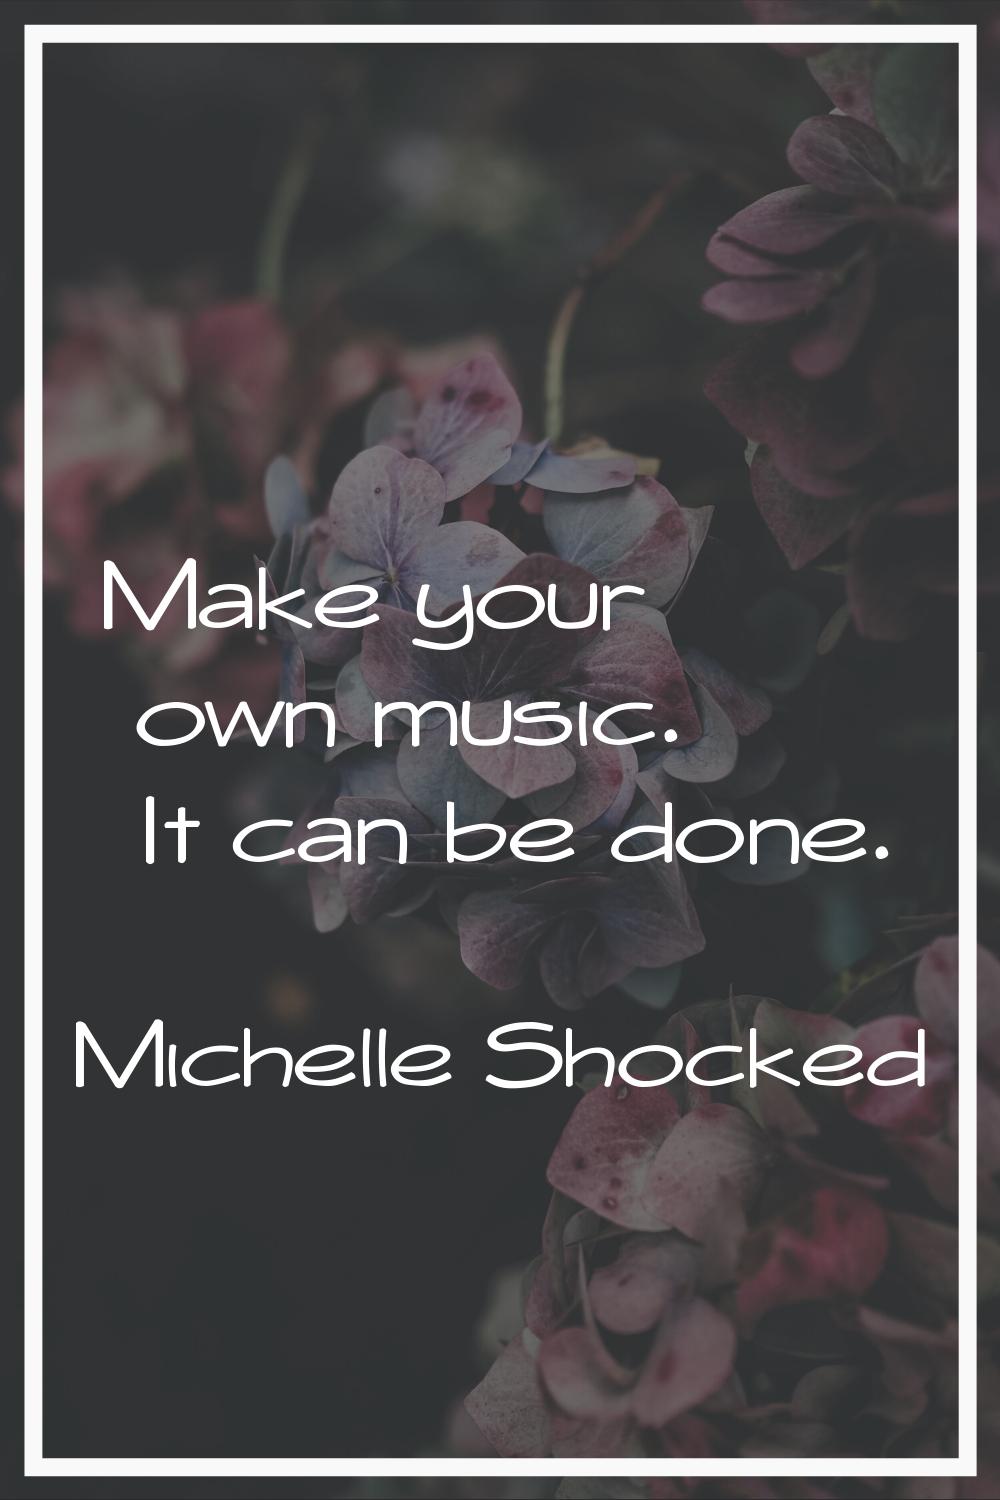 Make your own music. It can be done.